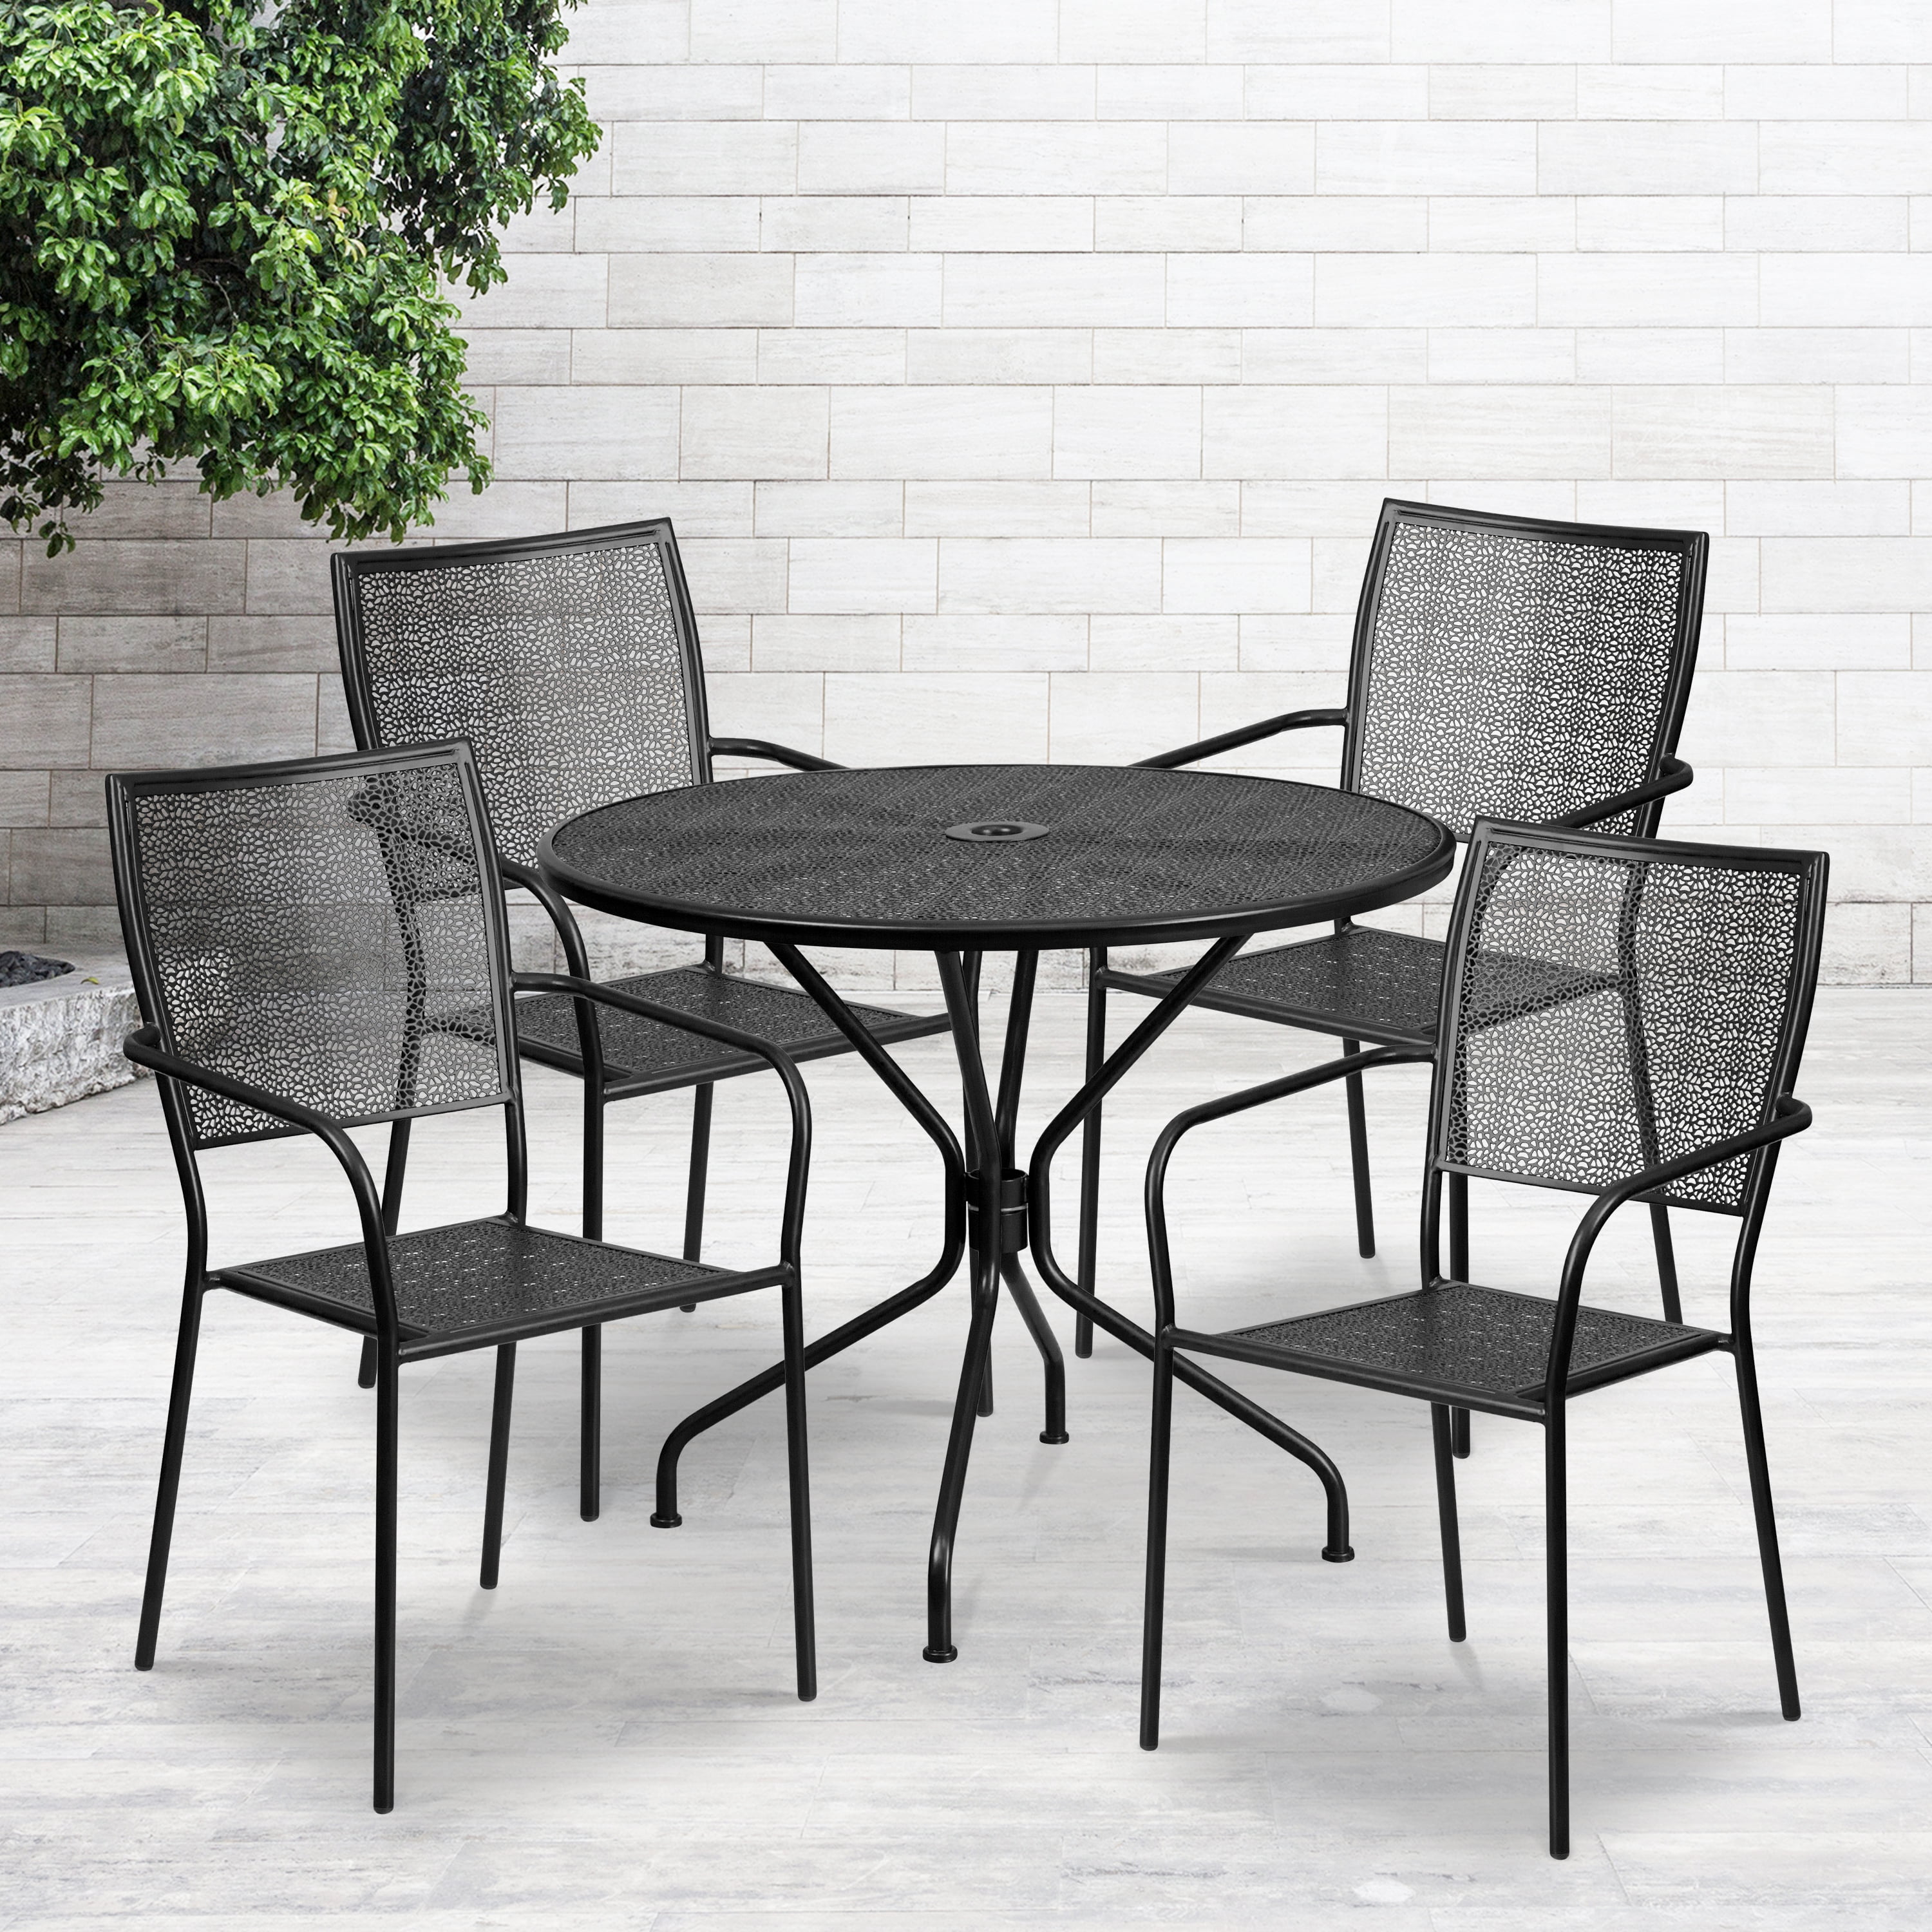 Flash Furniture Commercial Grade 35.25" Round Black Indoor-Outdoor Steel Patio Table Set with 4 Square Back Chairs - image 1 of 5